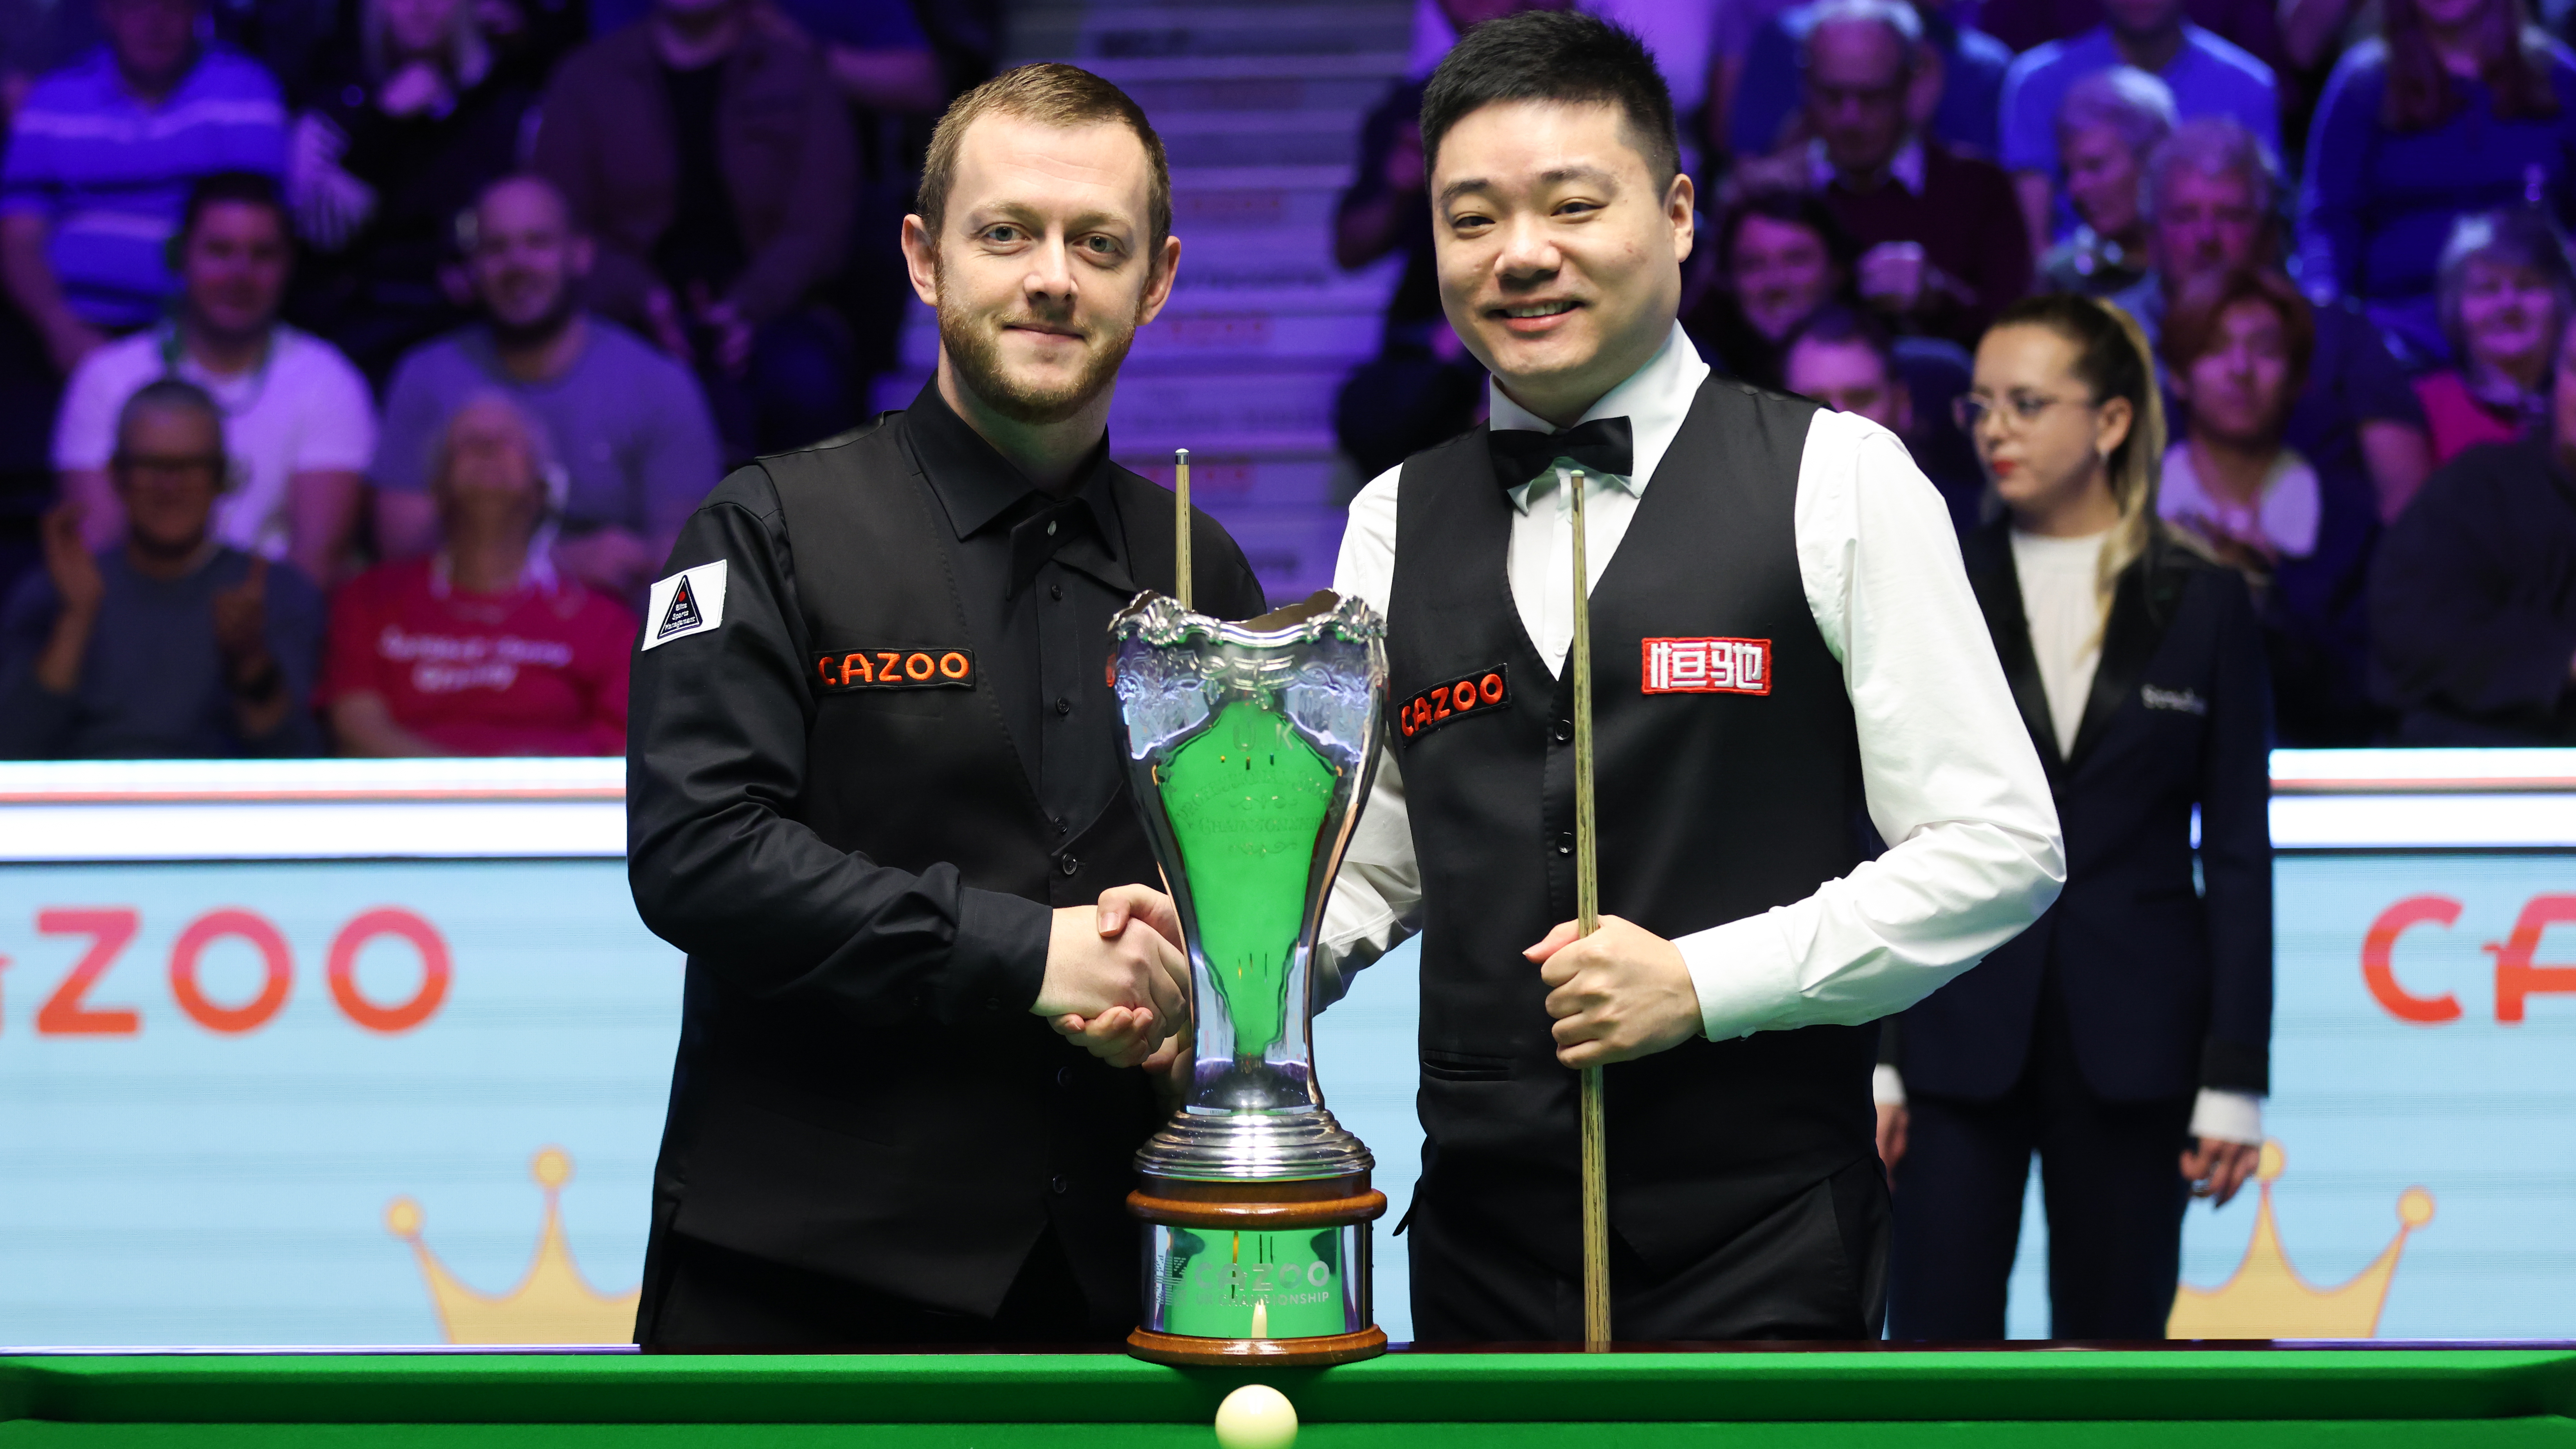 snooker results today 2022 live